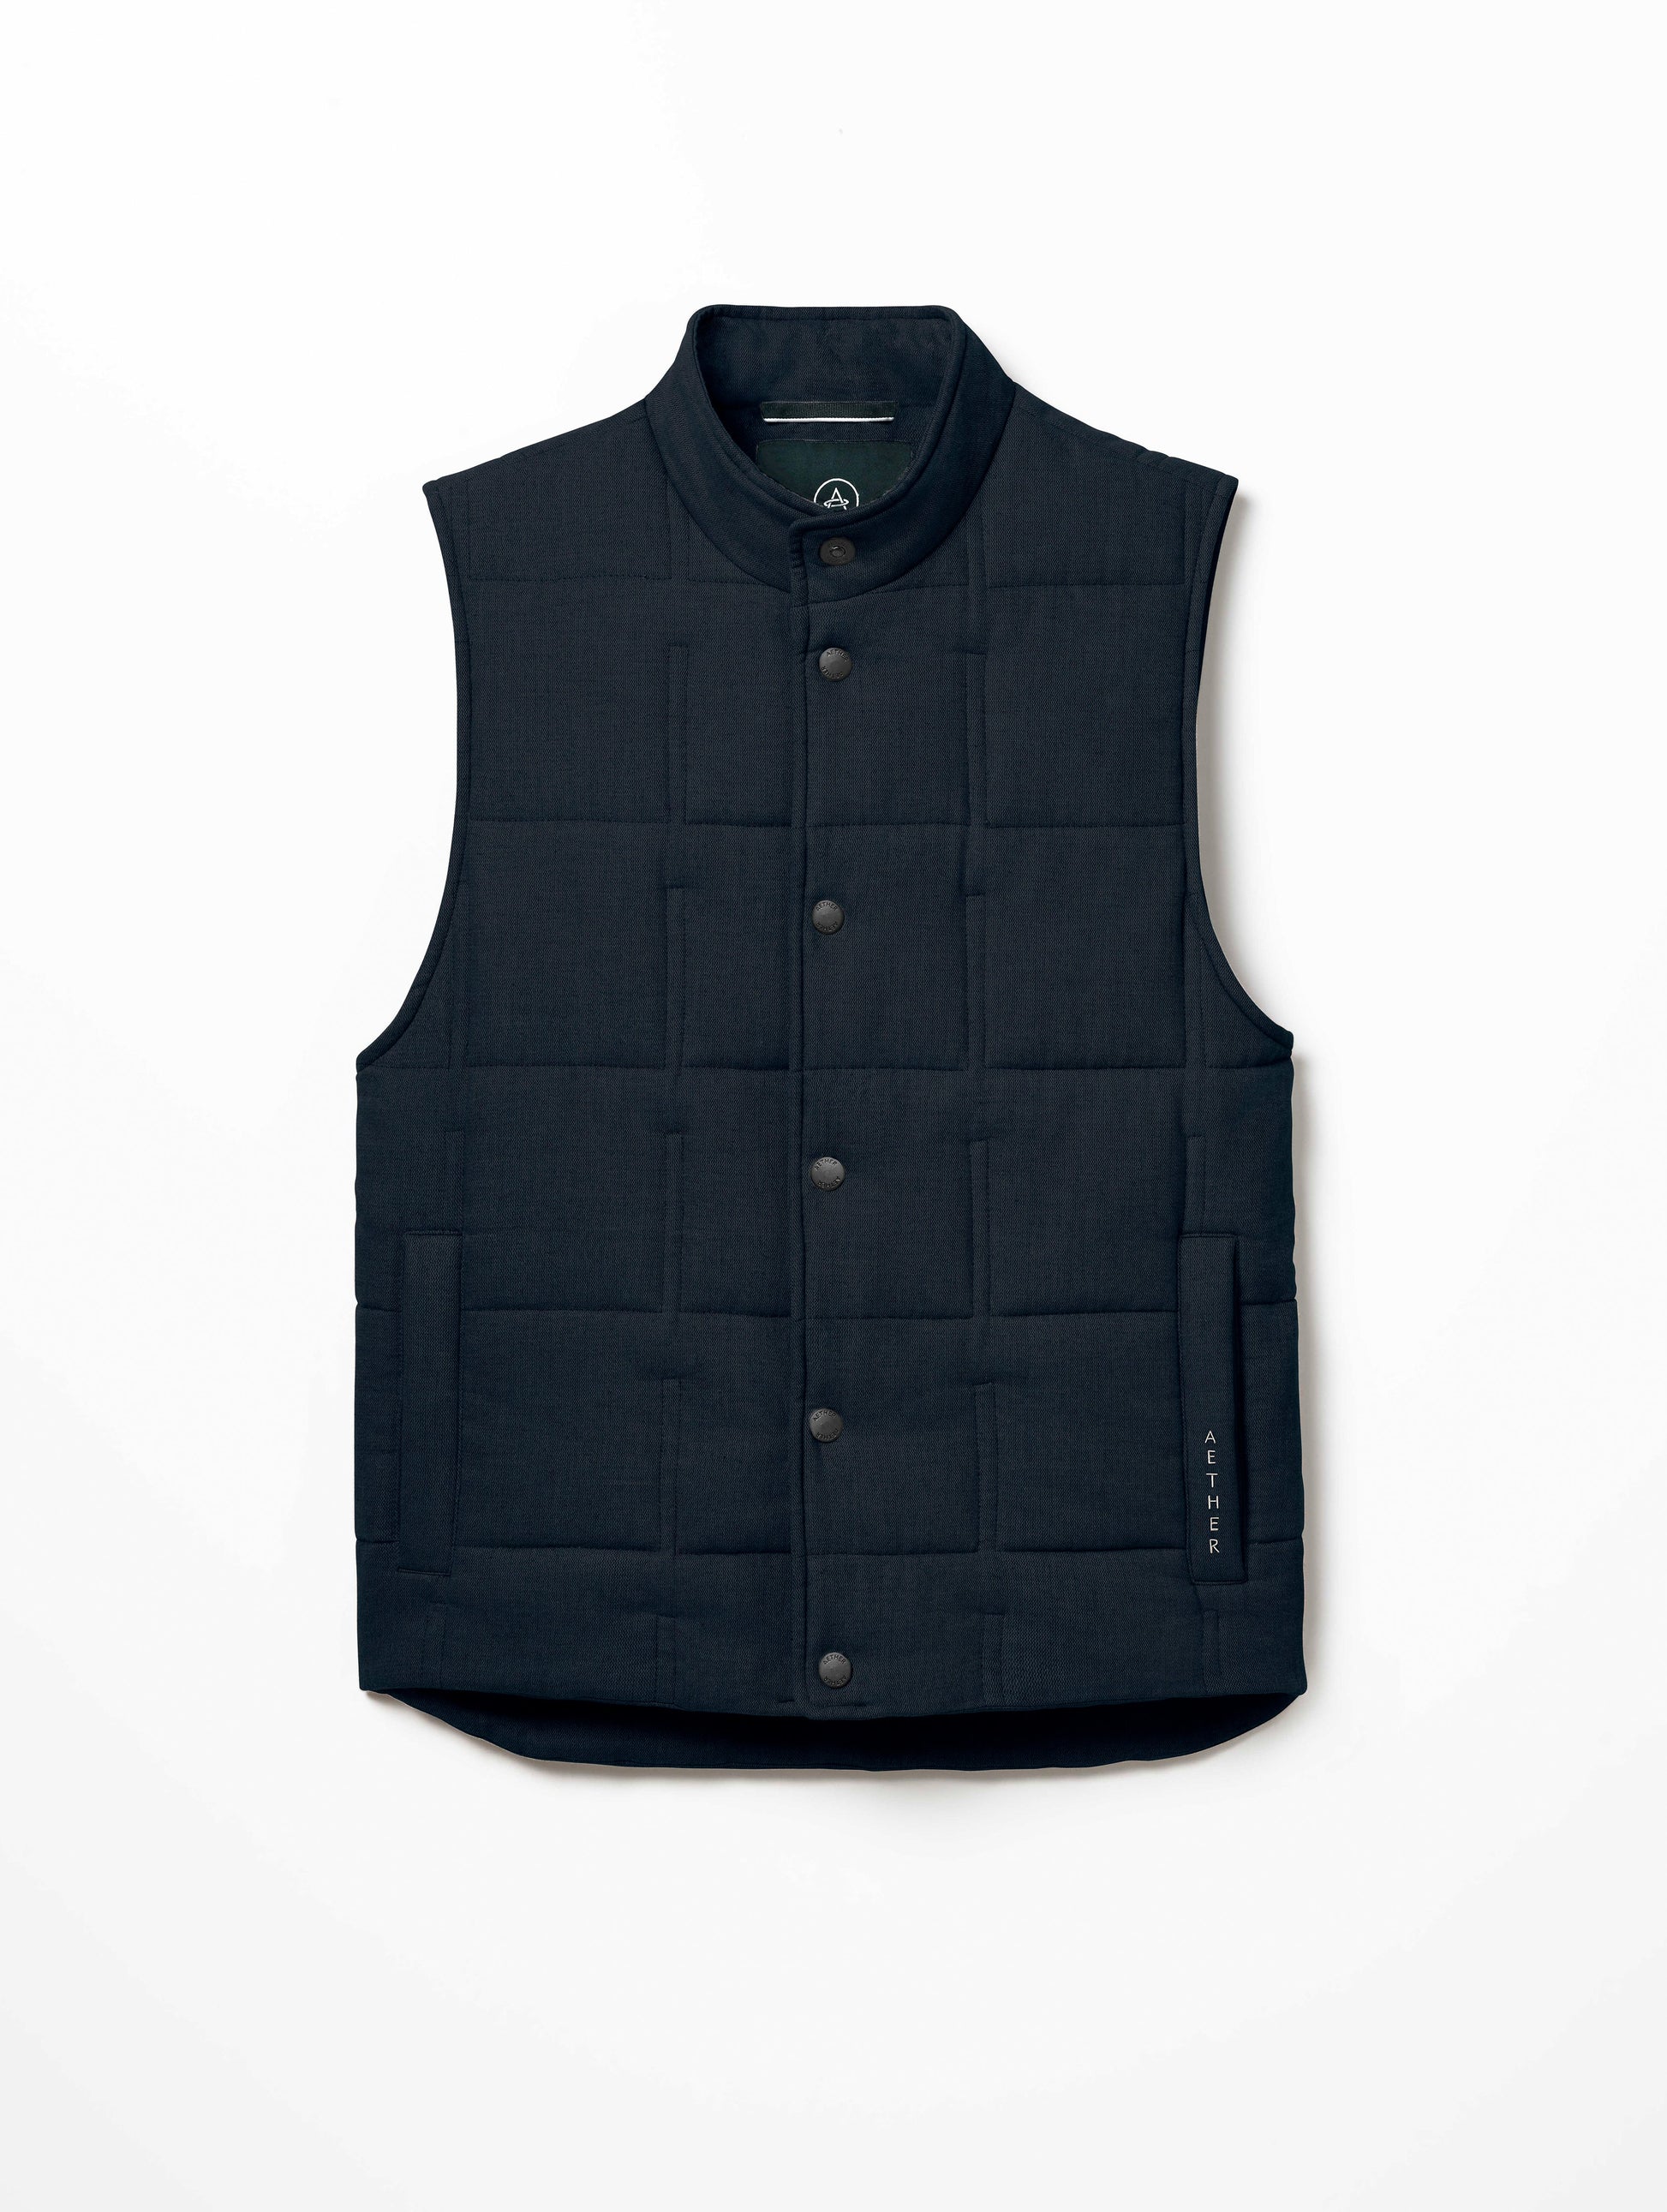 vest for men from Aether Apparel